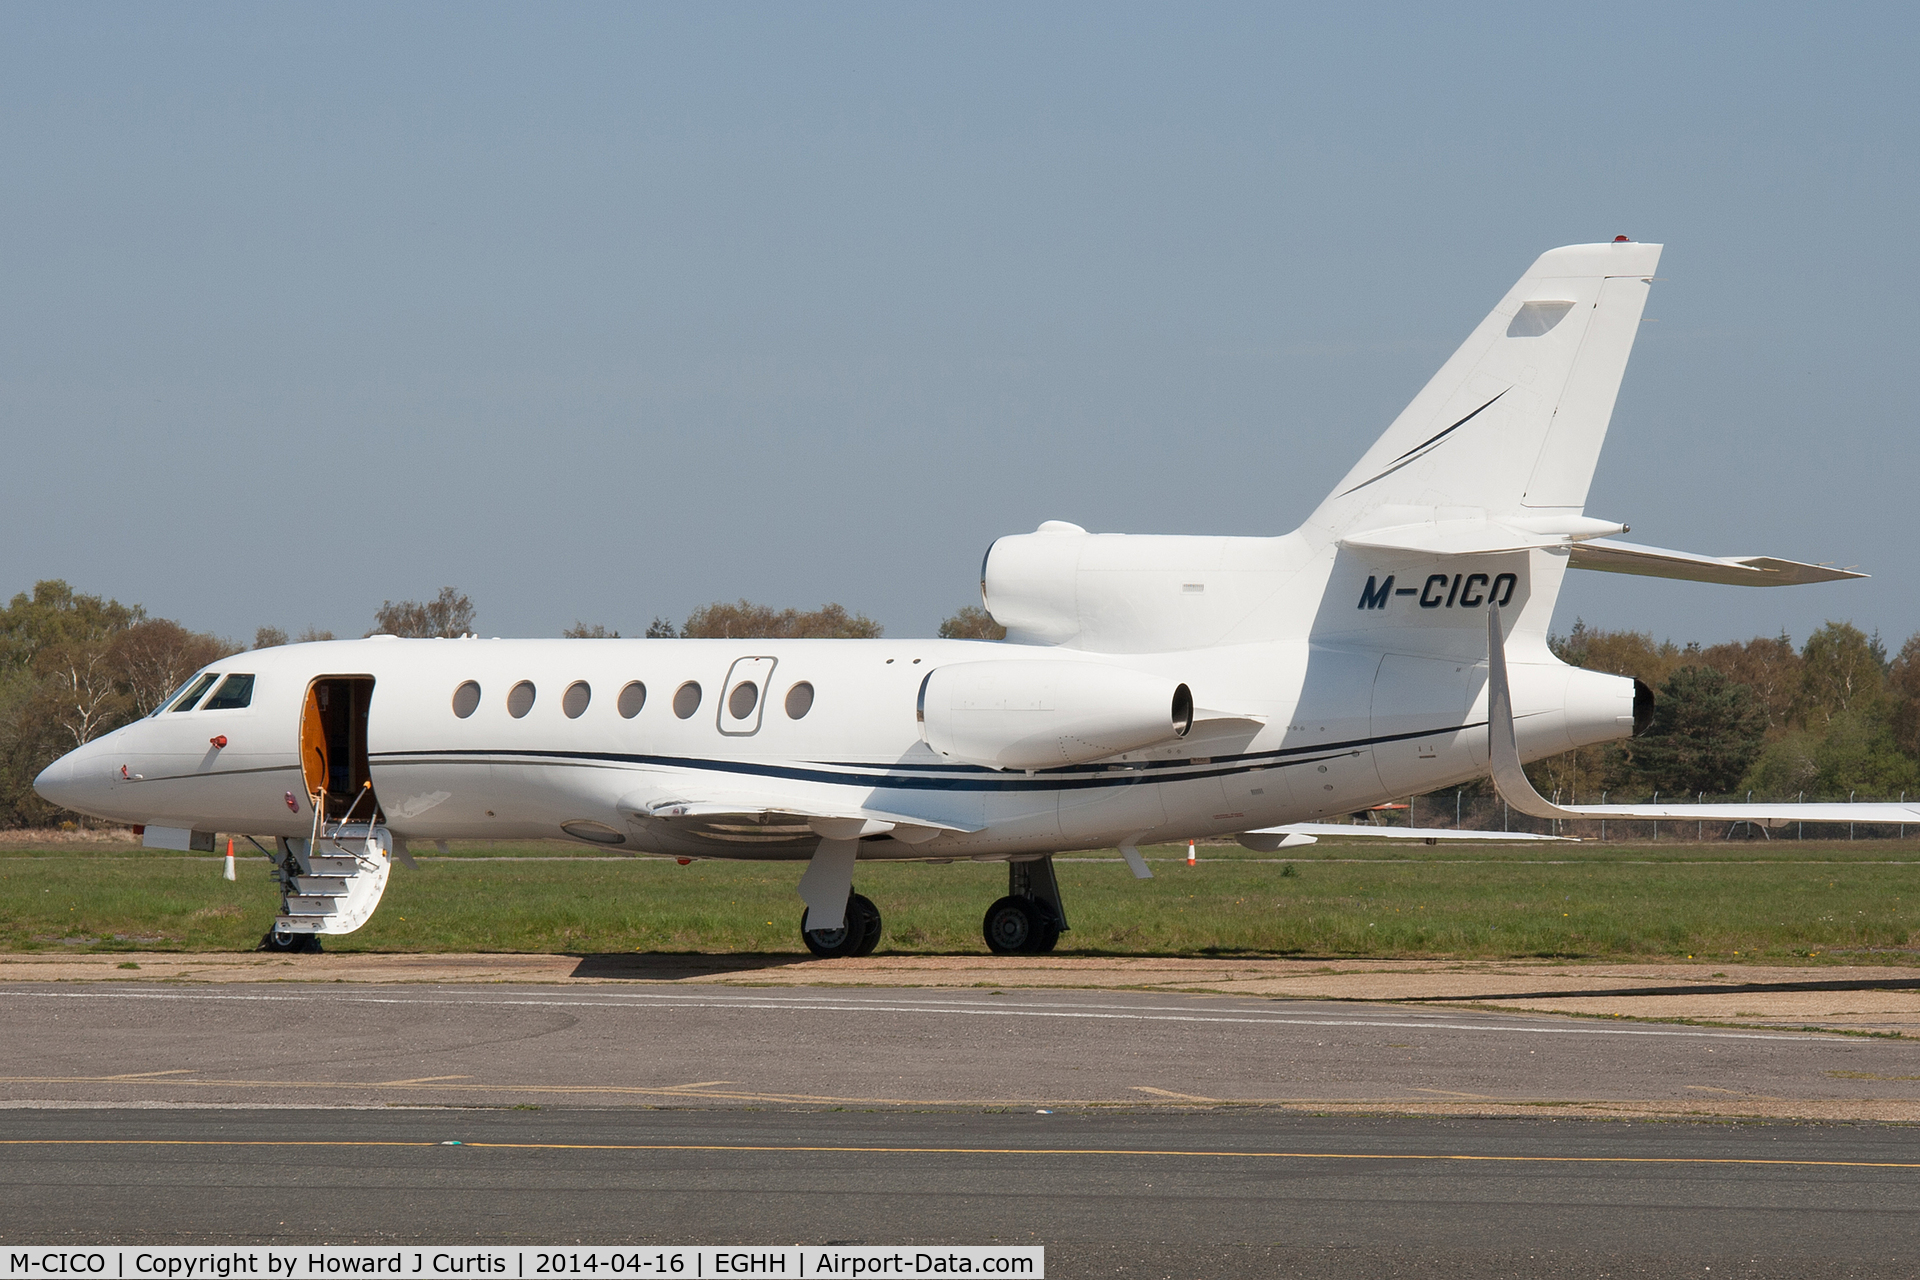 M-CICO, 2005 Dassault Falcon 50EX C/N 345, Privately owned.